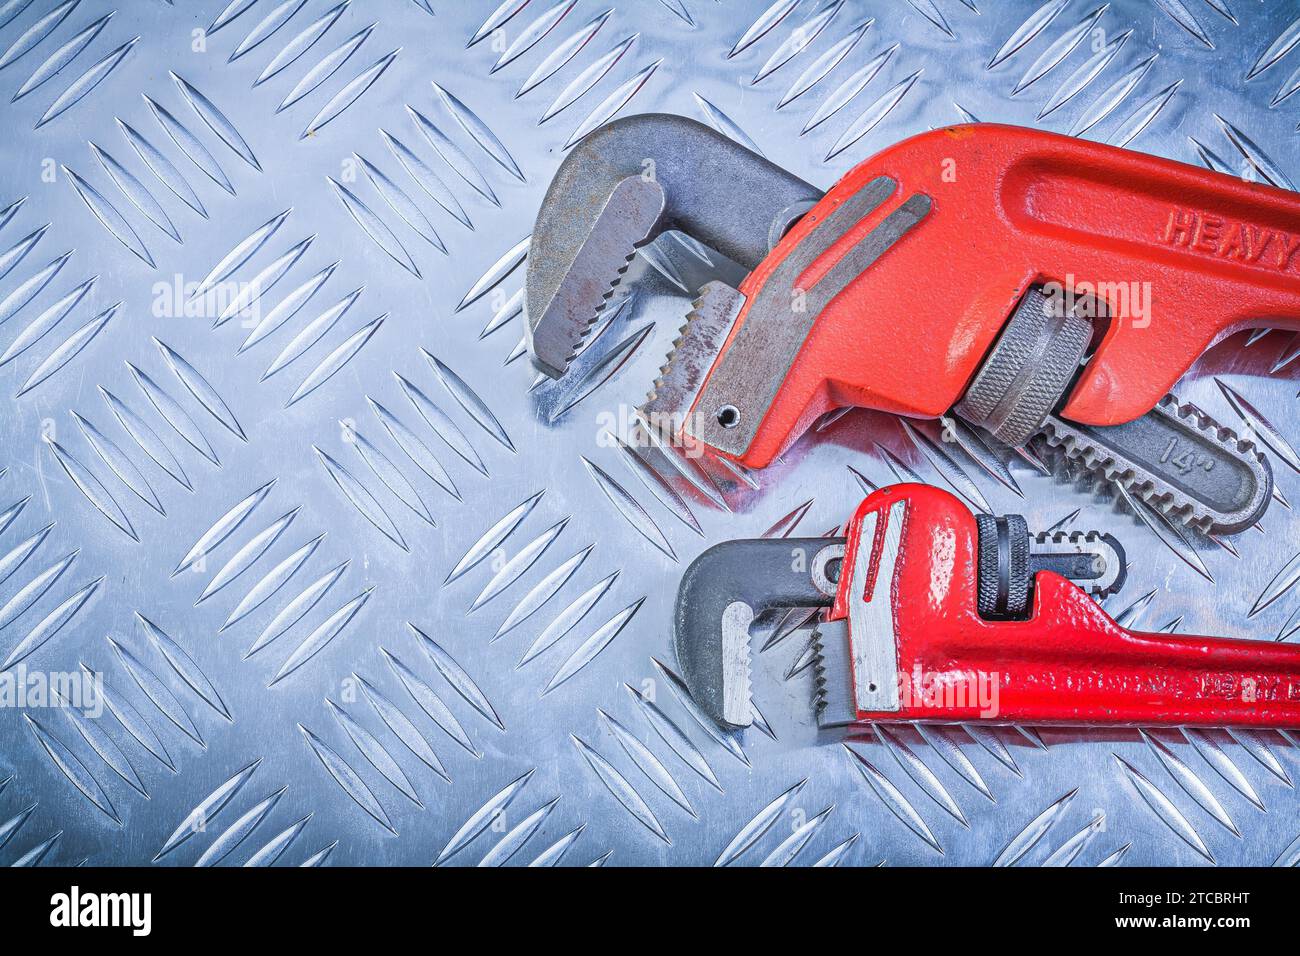 Composition of monkey spanners on a grooved metal background Design concept Stock Photo